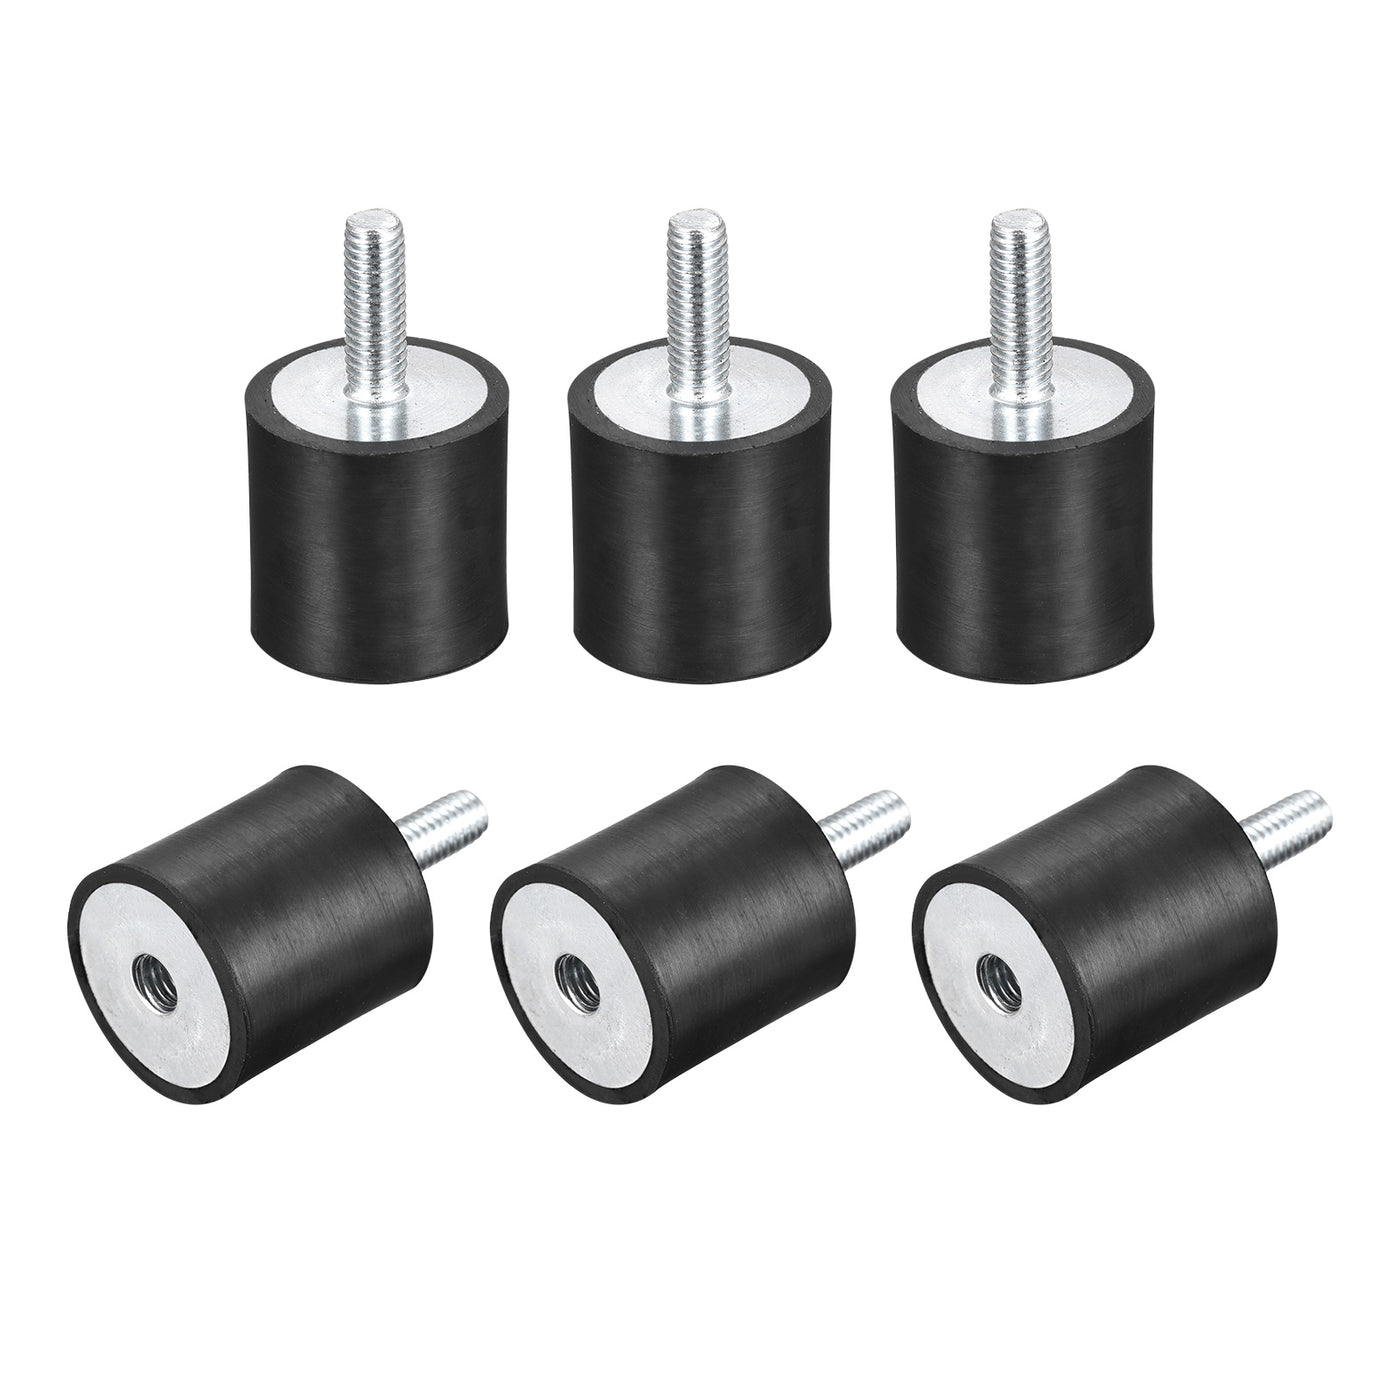 uxcell Uxcell Rubber Mount 6pcs M6 Male/Female Vibration Isolator Shock Absorber, D25mmxH25mm